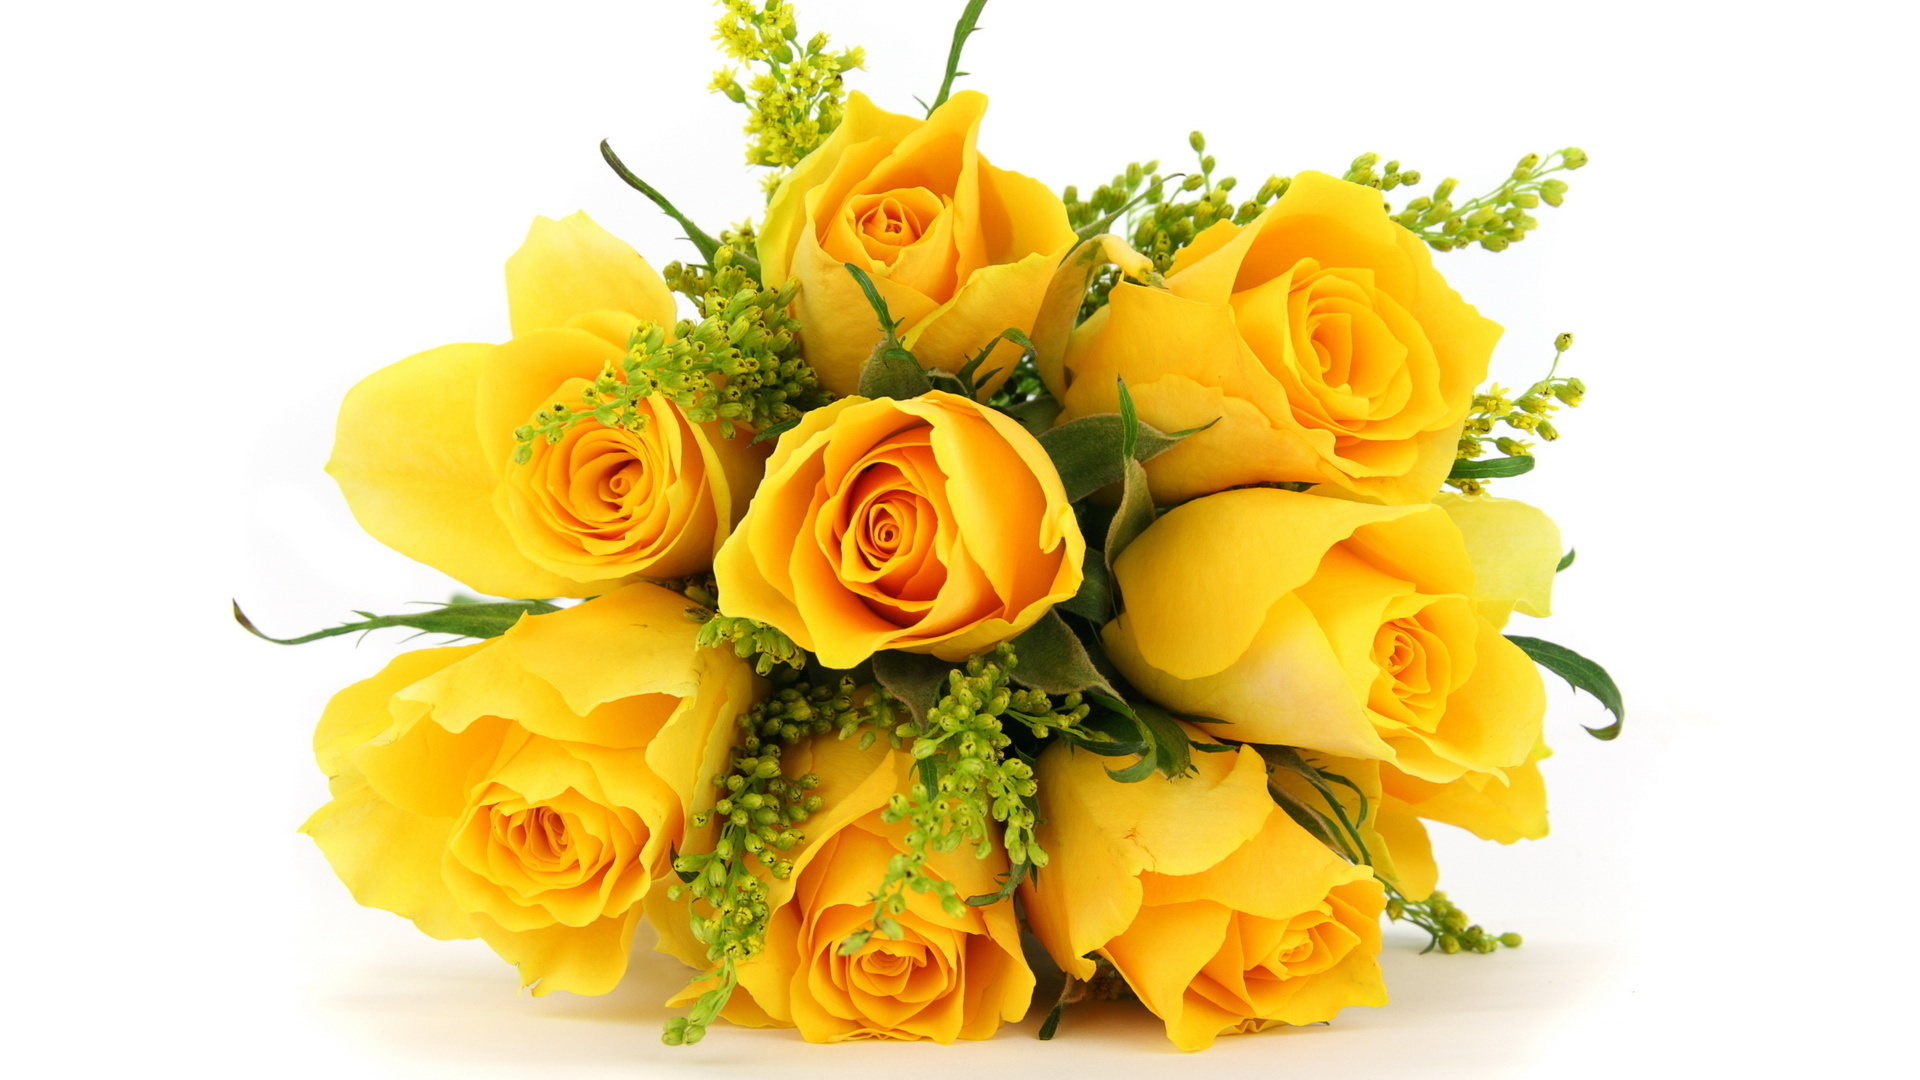 Rose Nature Flower Bouquet Yellow Flower Yellow Rose 1920x1080